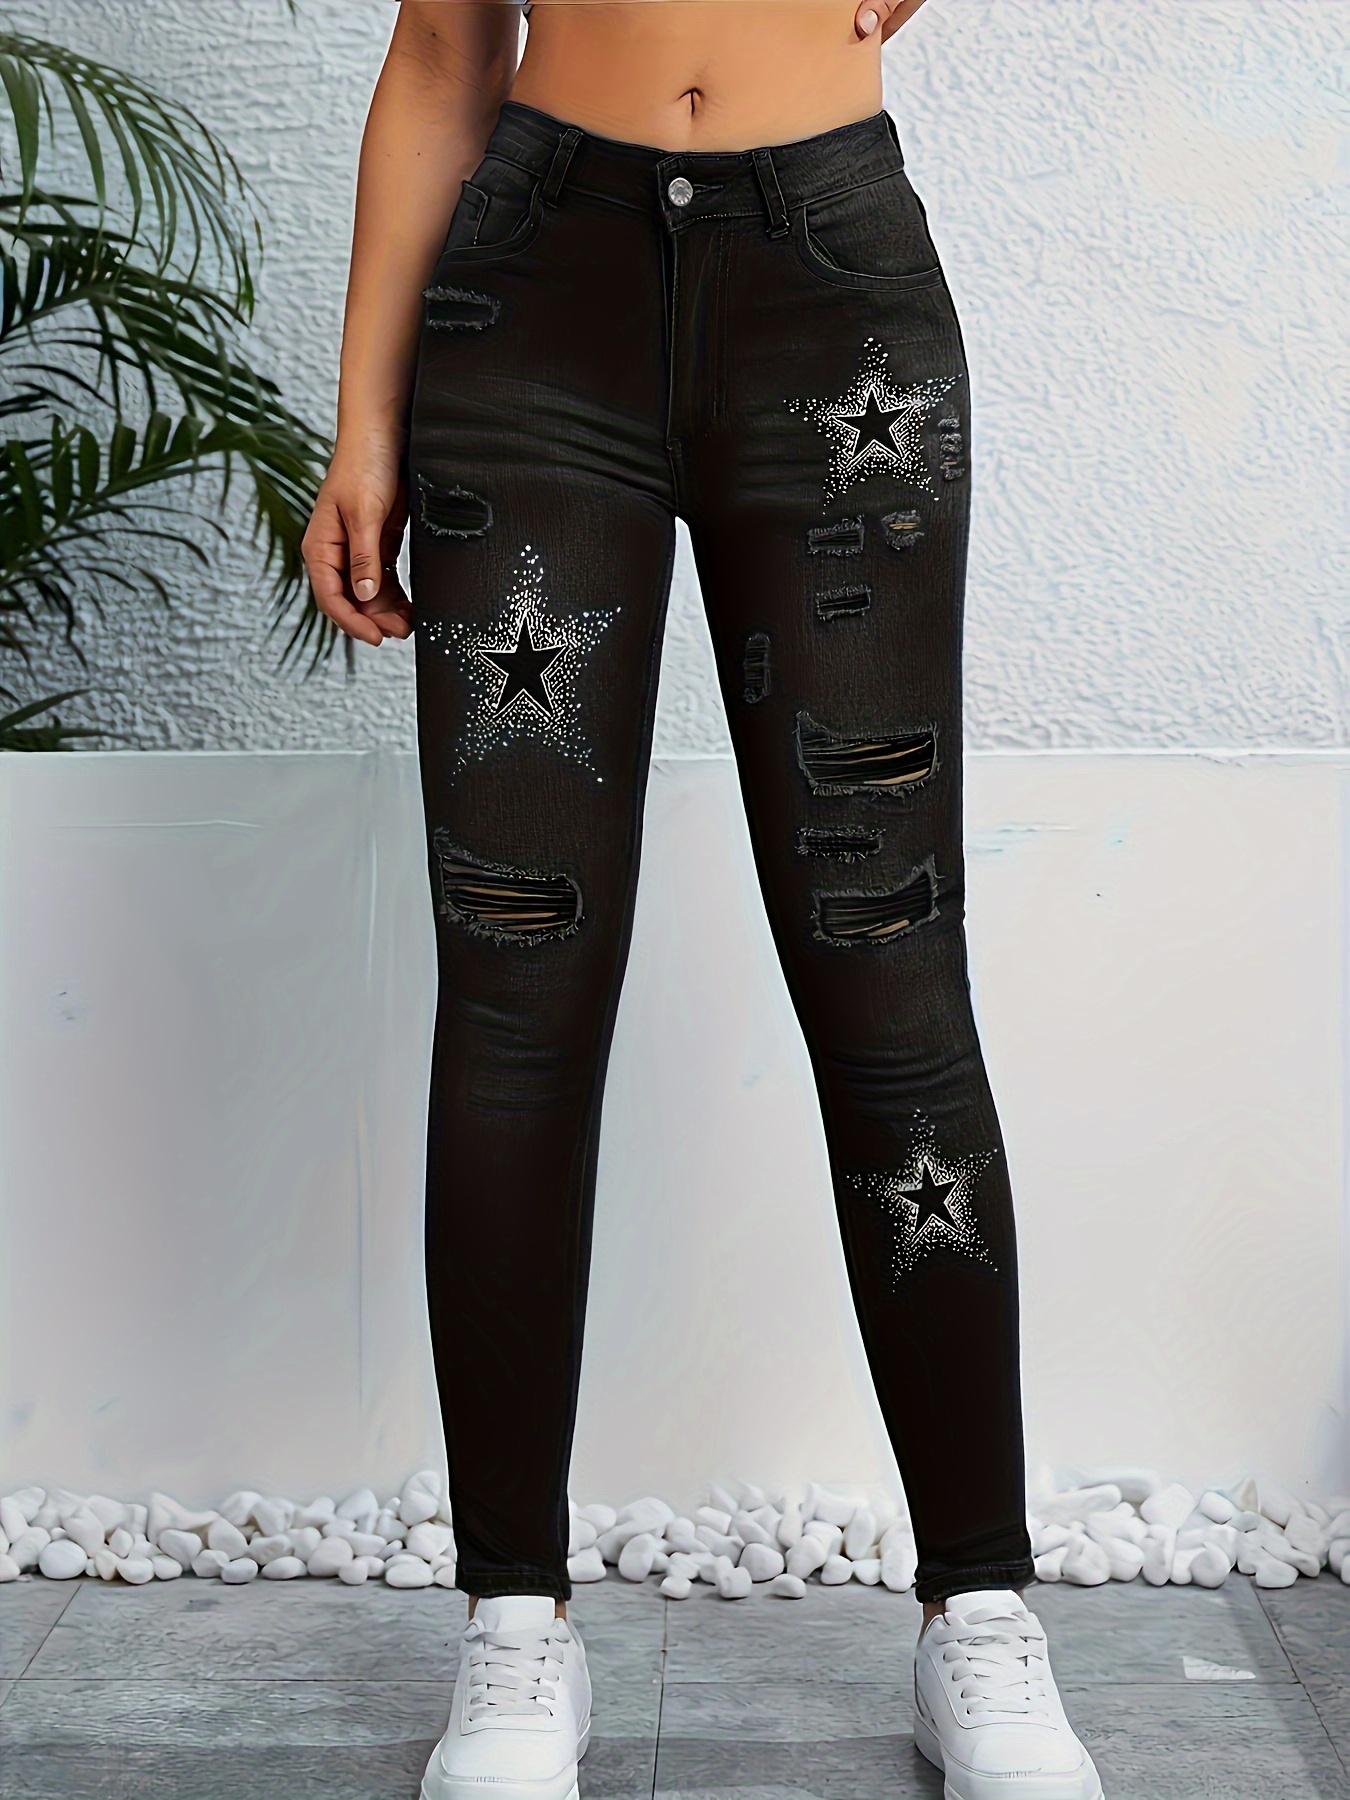 Ripped Holes Casual Skinny Jeans, High Stretch Slim Fit Denim Pants,  Women's Denim Jeans & Clothing